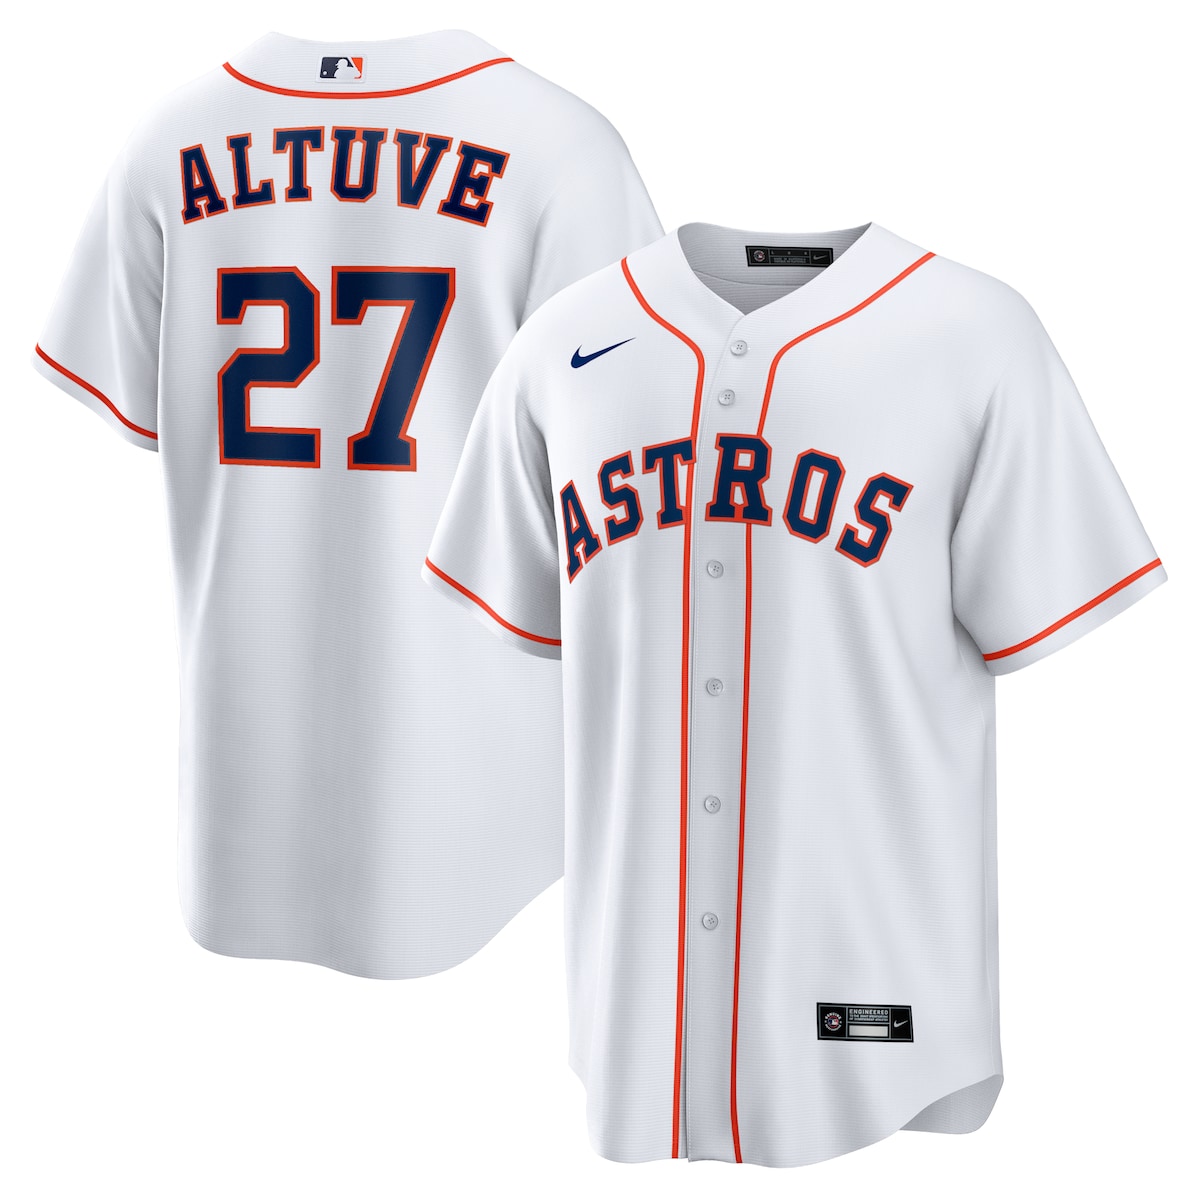 MLB ȥ ۥȥ ץꥫ ˥ե Nike ʥ  ۥ磻 (Men's MLB Nike Official Replica Player Jersey)